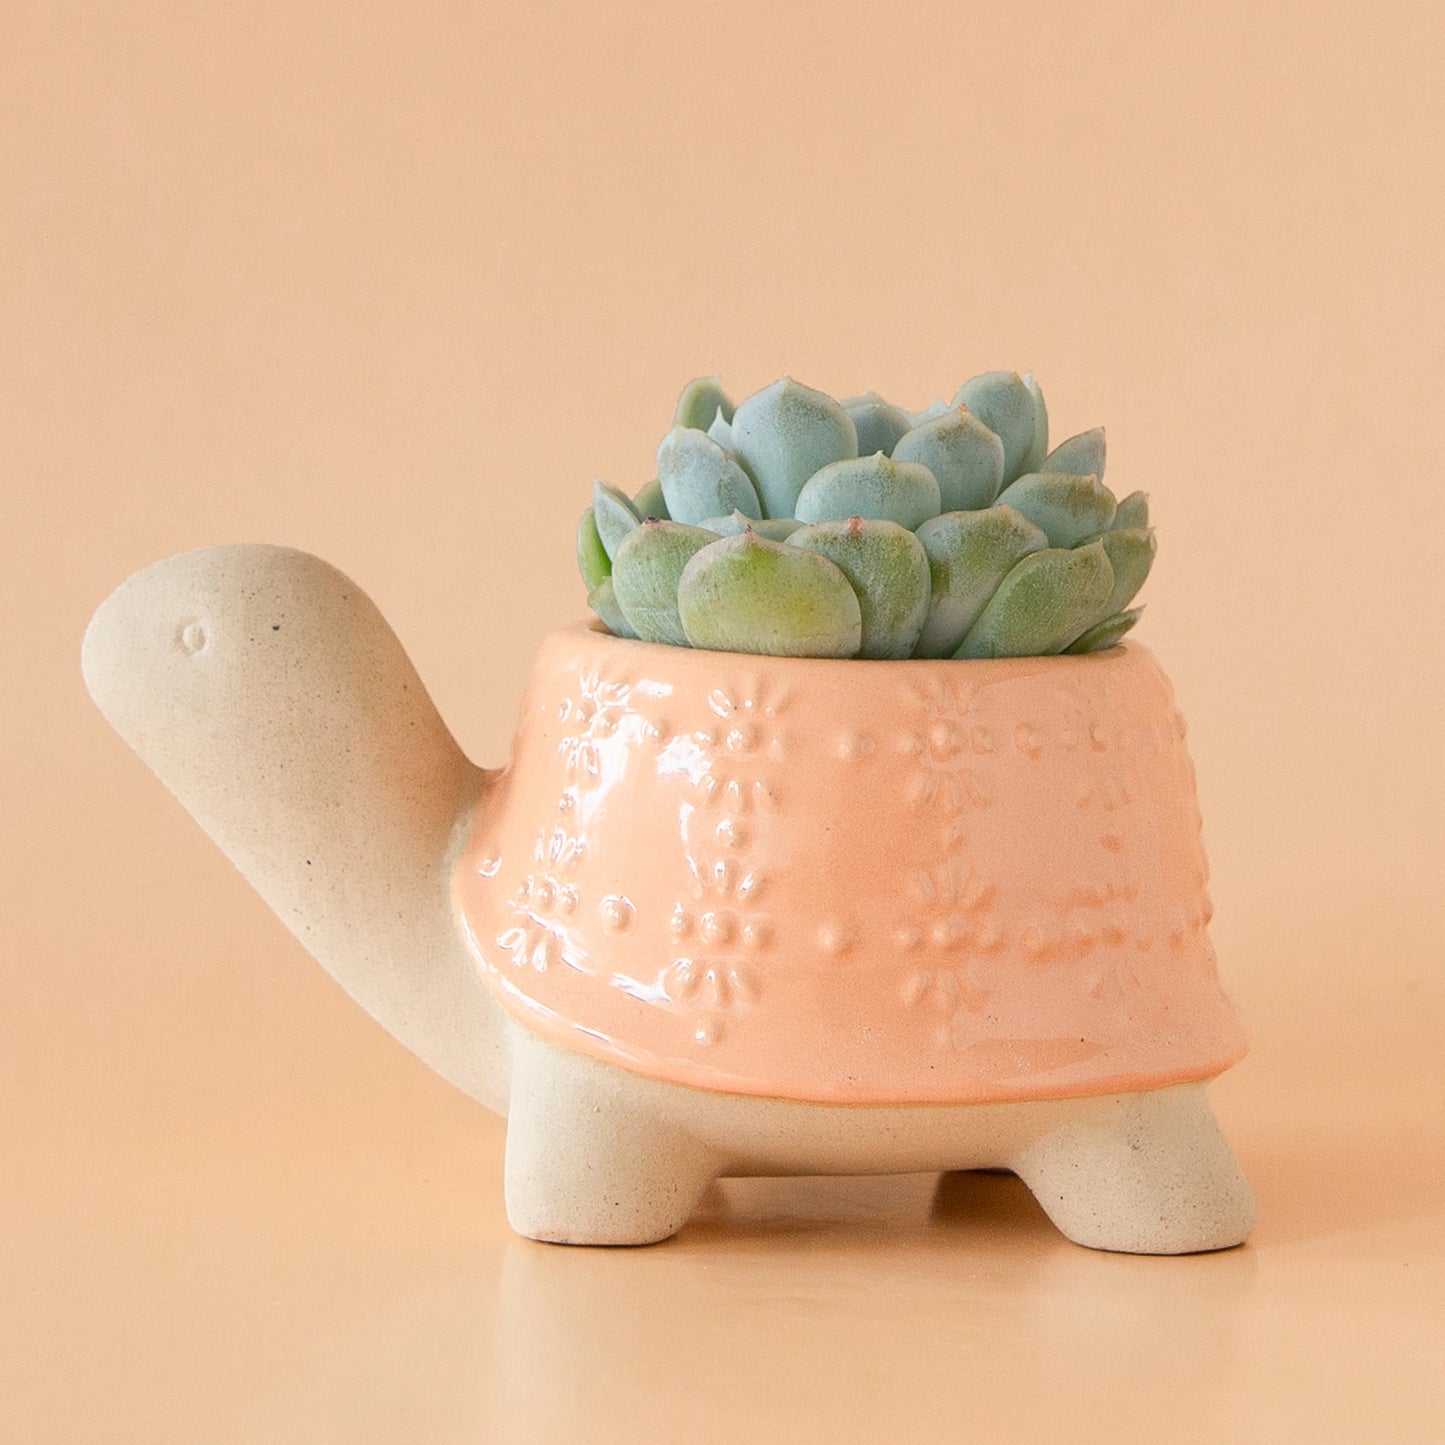 On a light peachy background is a ceramic planter in the shape of a turtle with a light orange "shell" that has a subtle floral texture on it. Here is is photographed with a succulent planted inside which is sold separately.